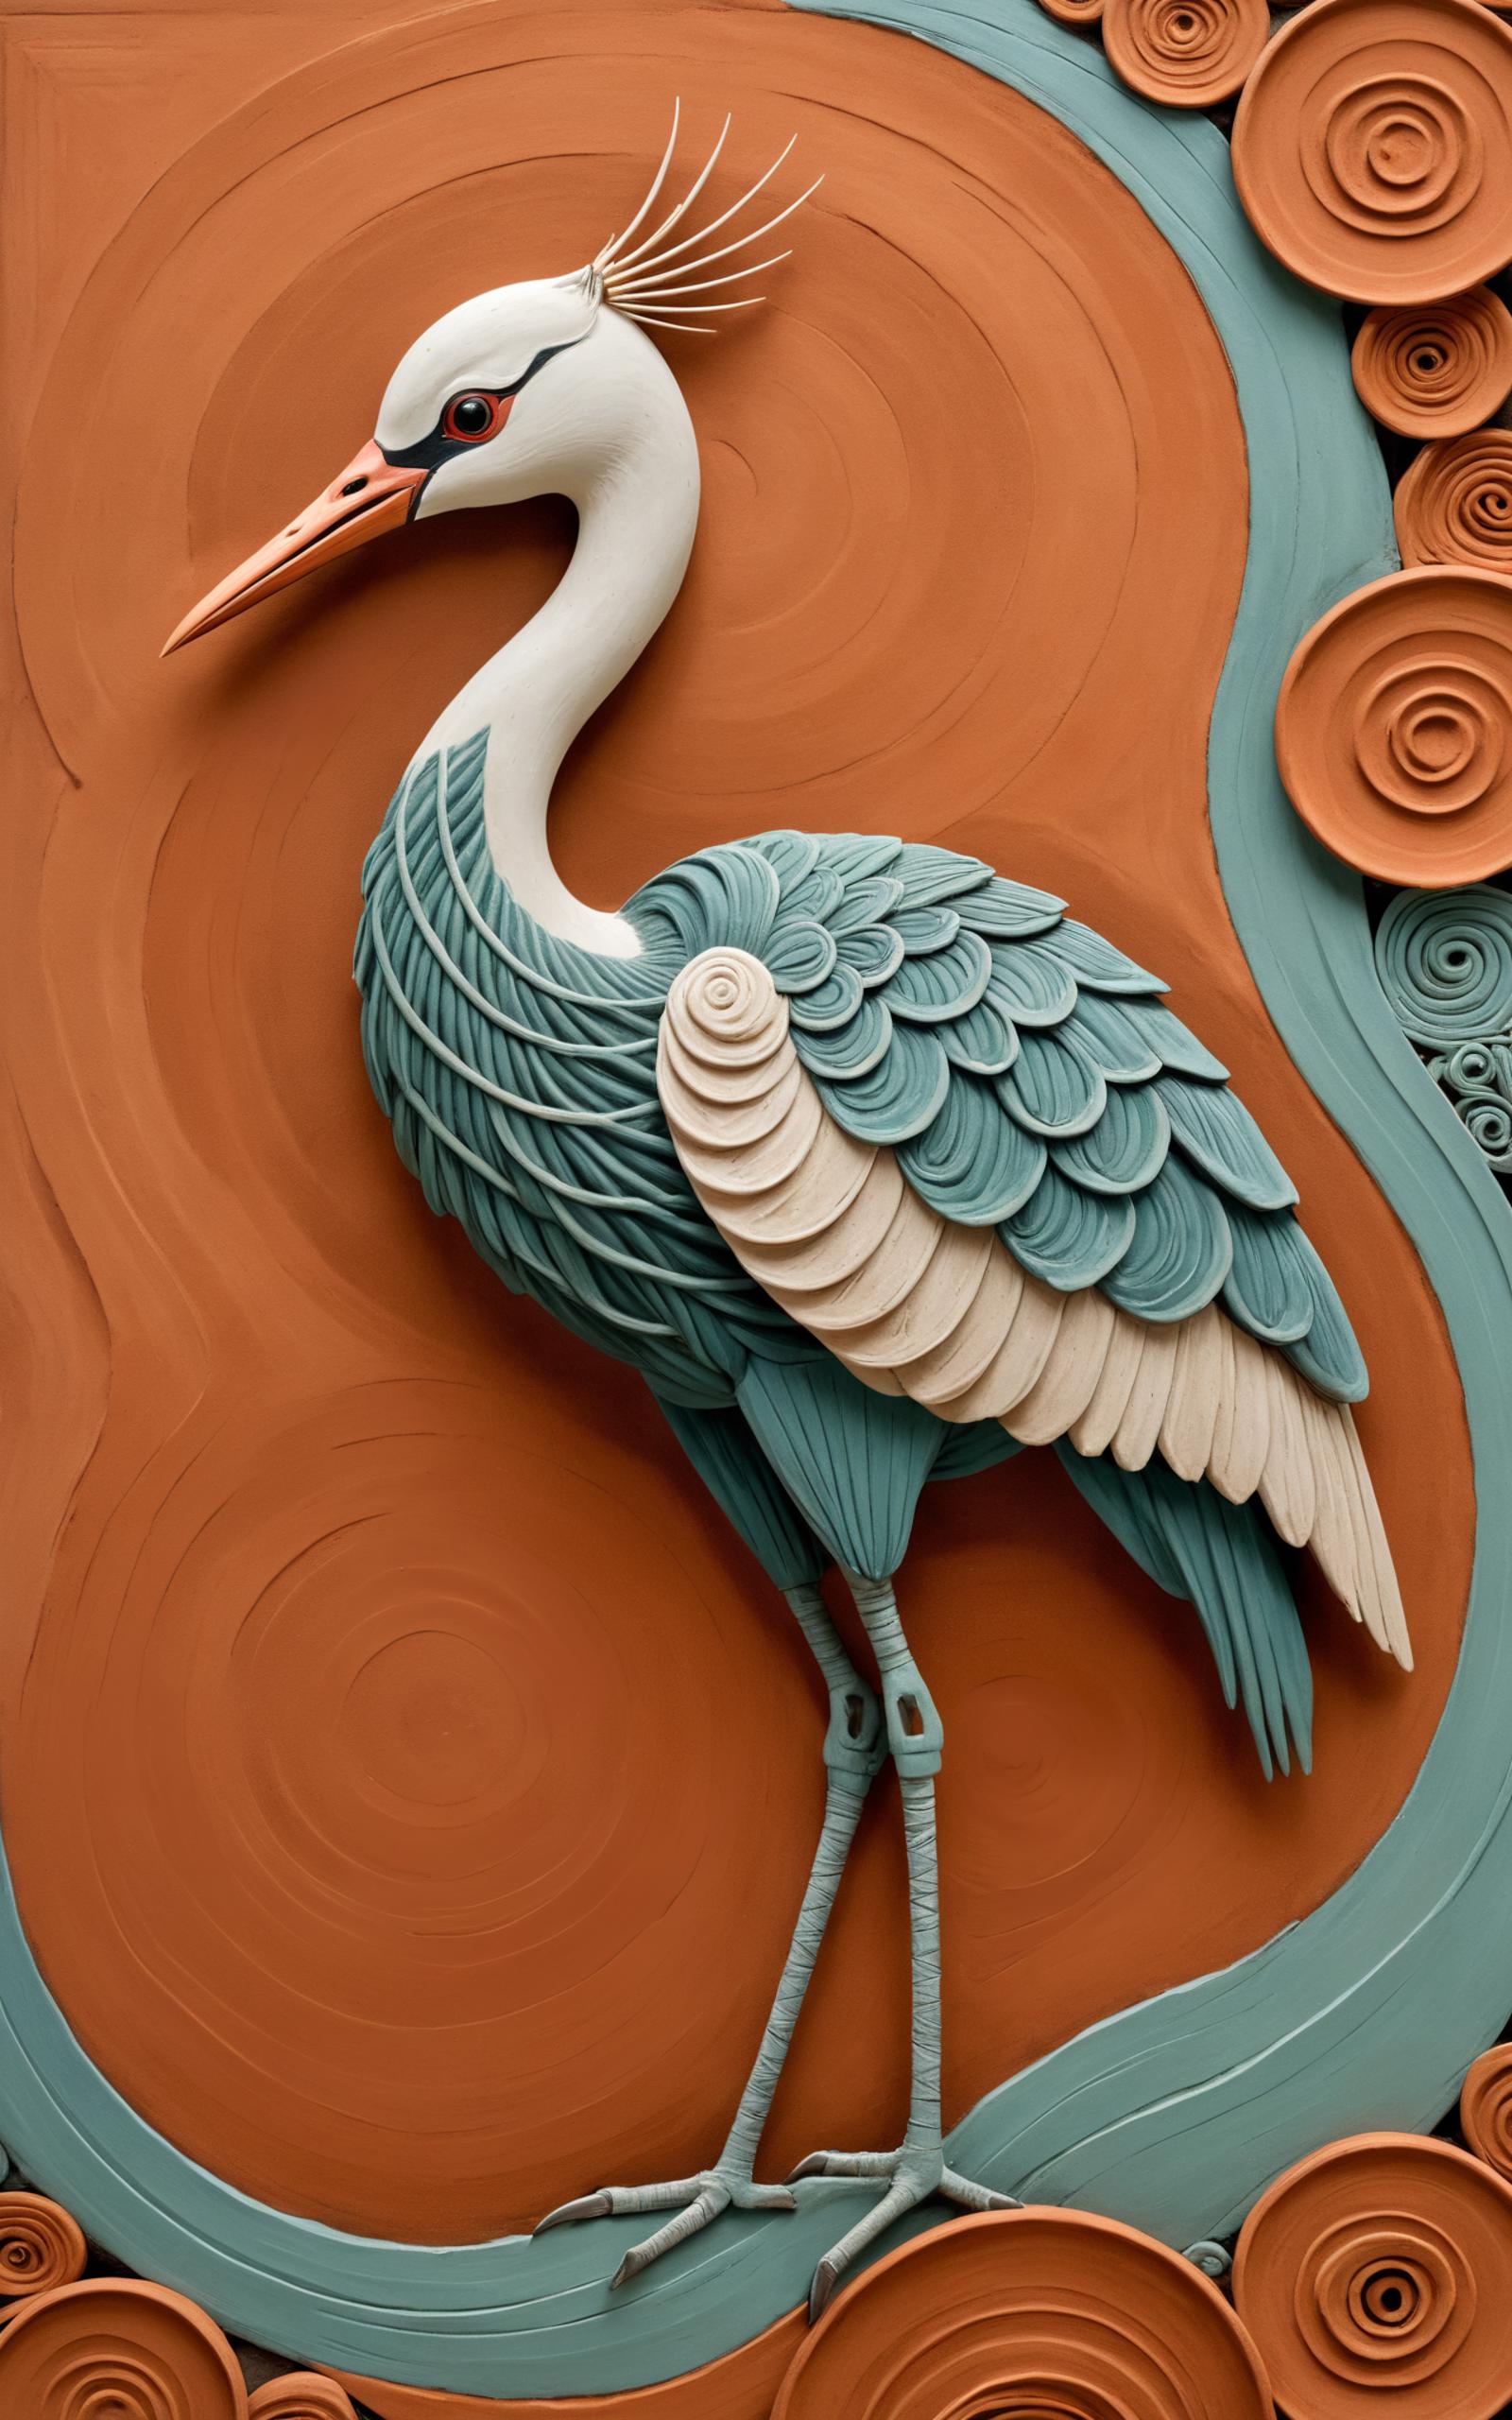 A blue and white bird sculpture with a long neck and feet on an orange background.